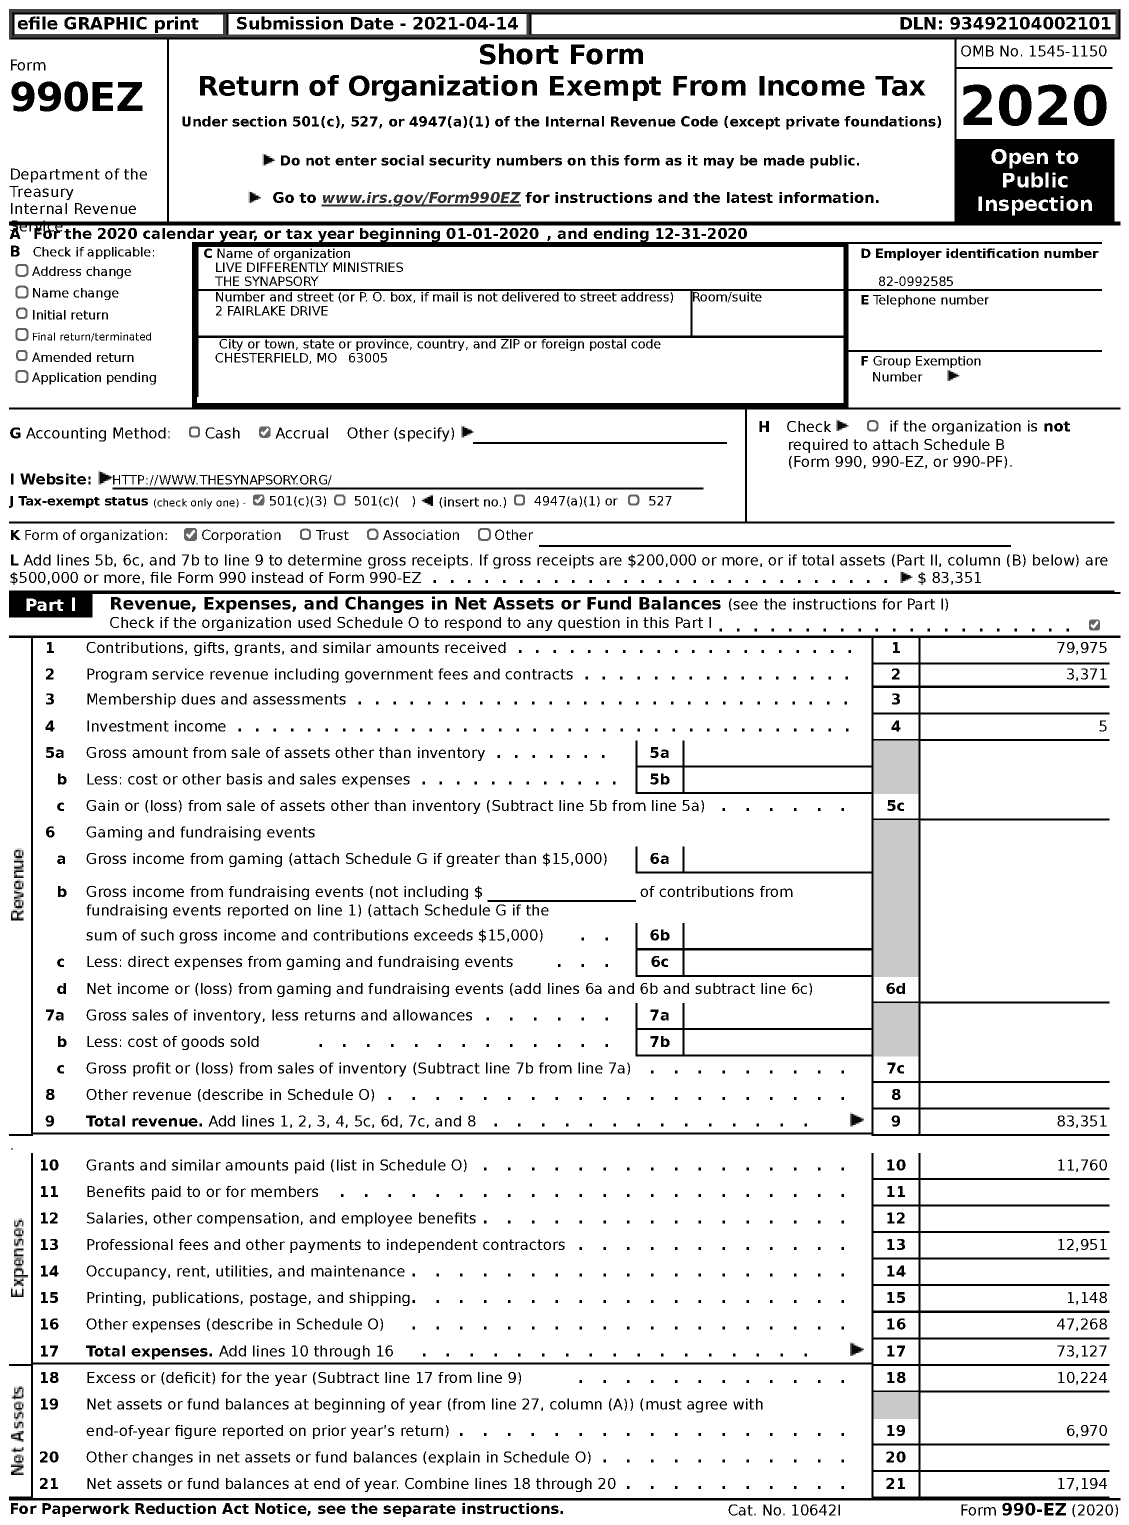 Image of first page of 2020 Form 990EZ for Live Differently Ministries the Synapsory